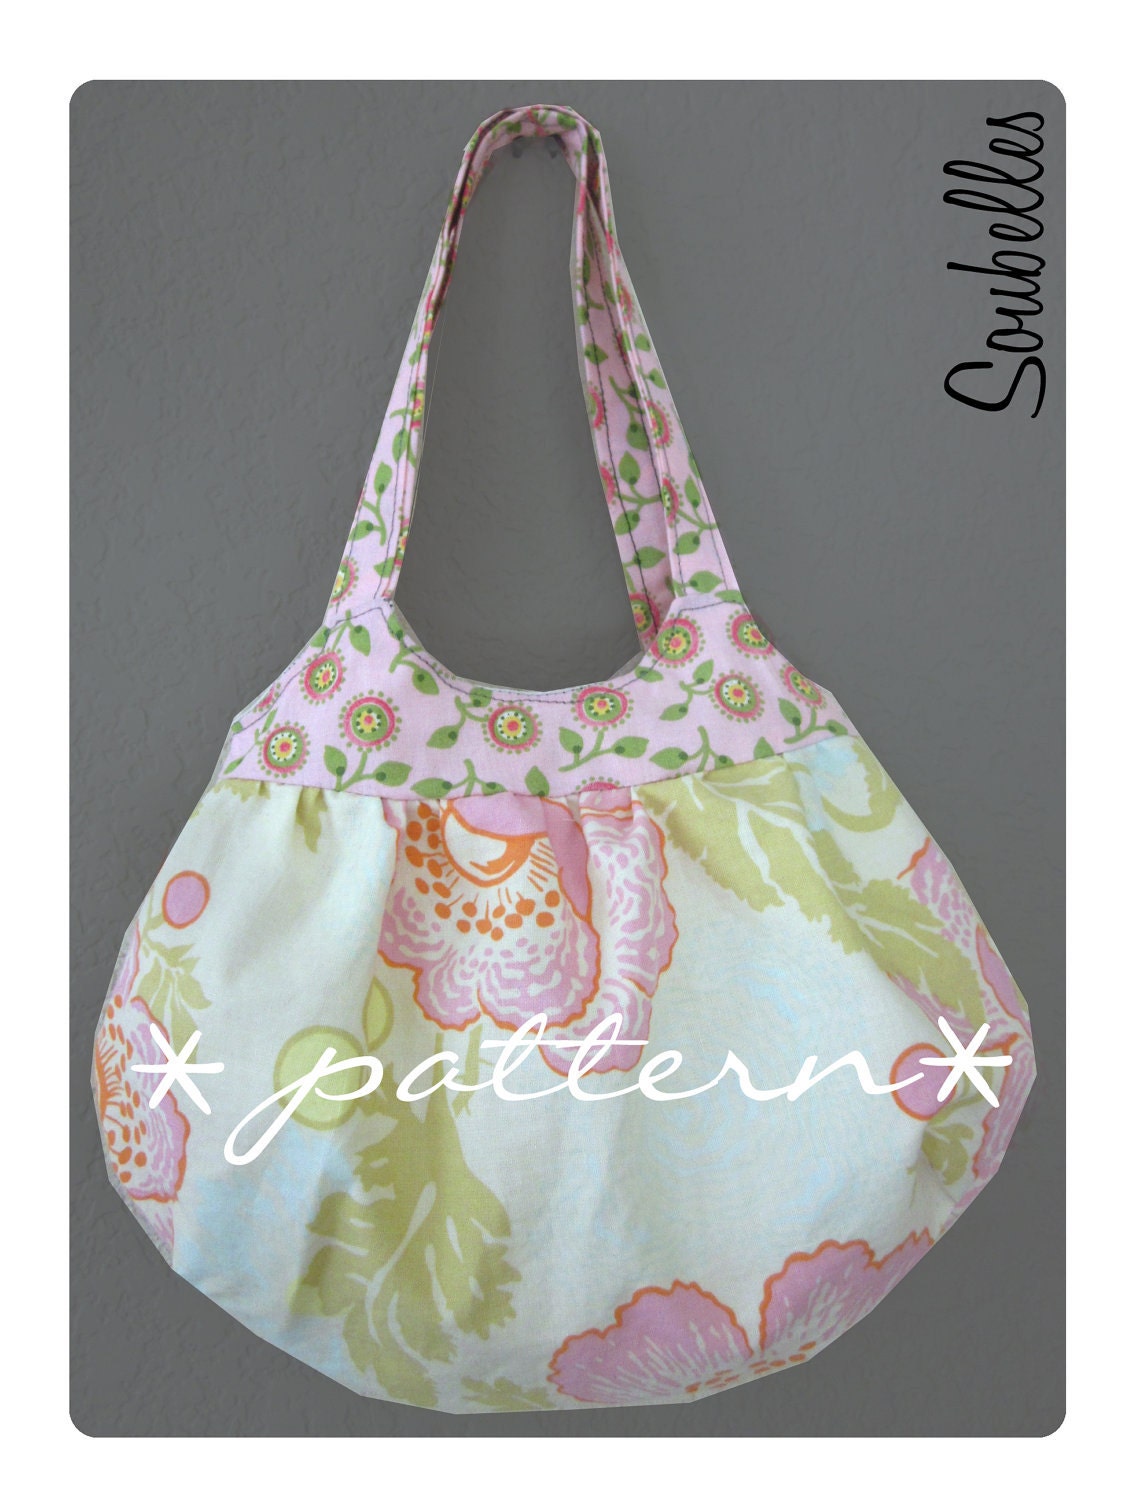 Free Sewing Patterns and Sewing Machine Help at AllCrafts!